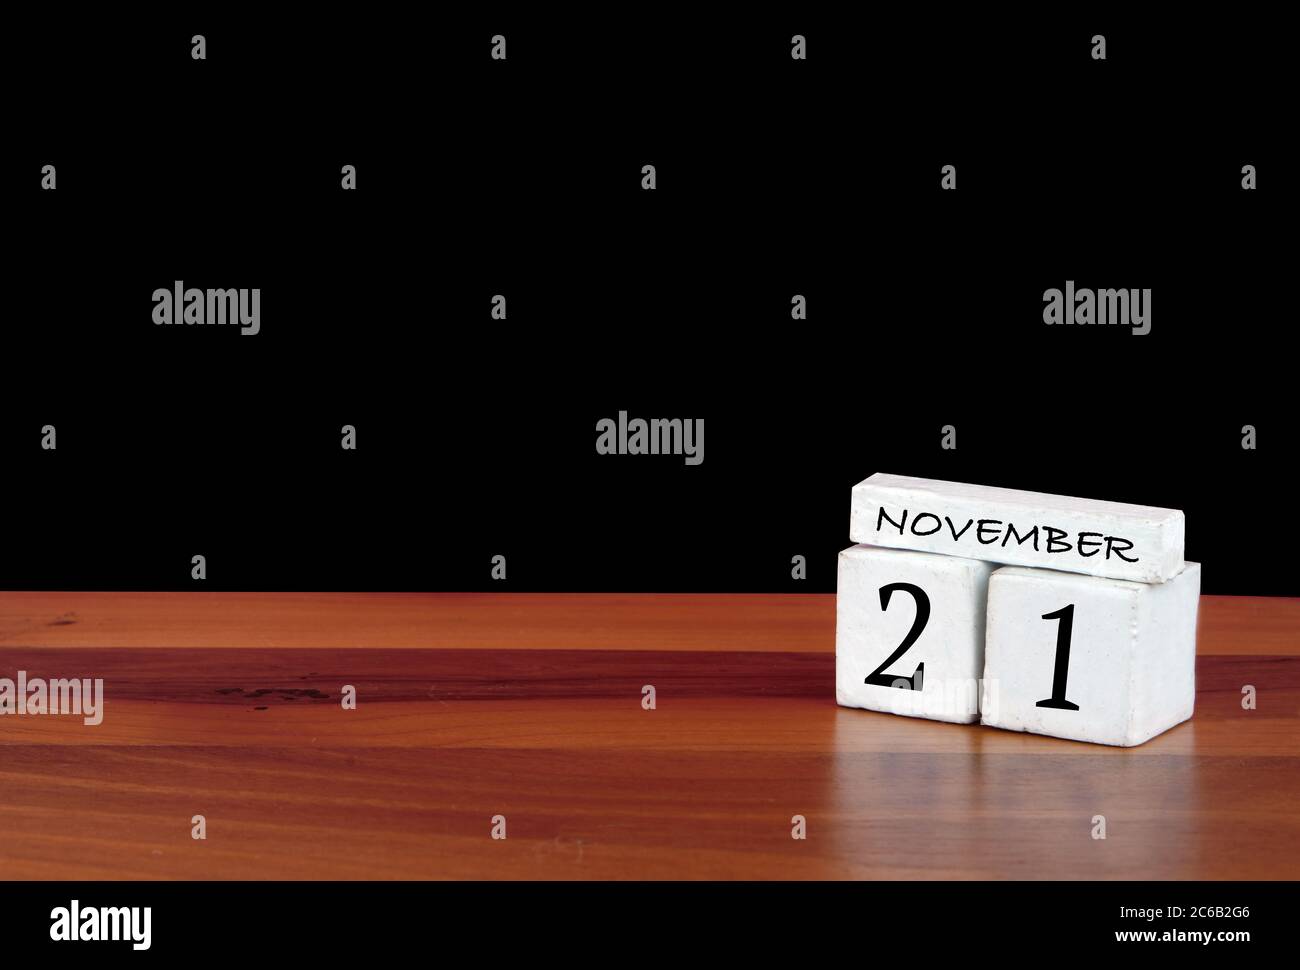 21 November calendar month. 21 days of the month. Reflected calendar on wooden floor with black background Stock Photo